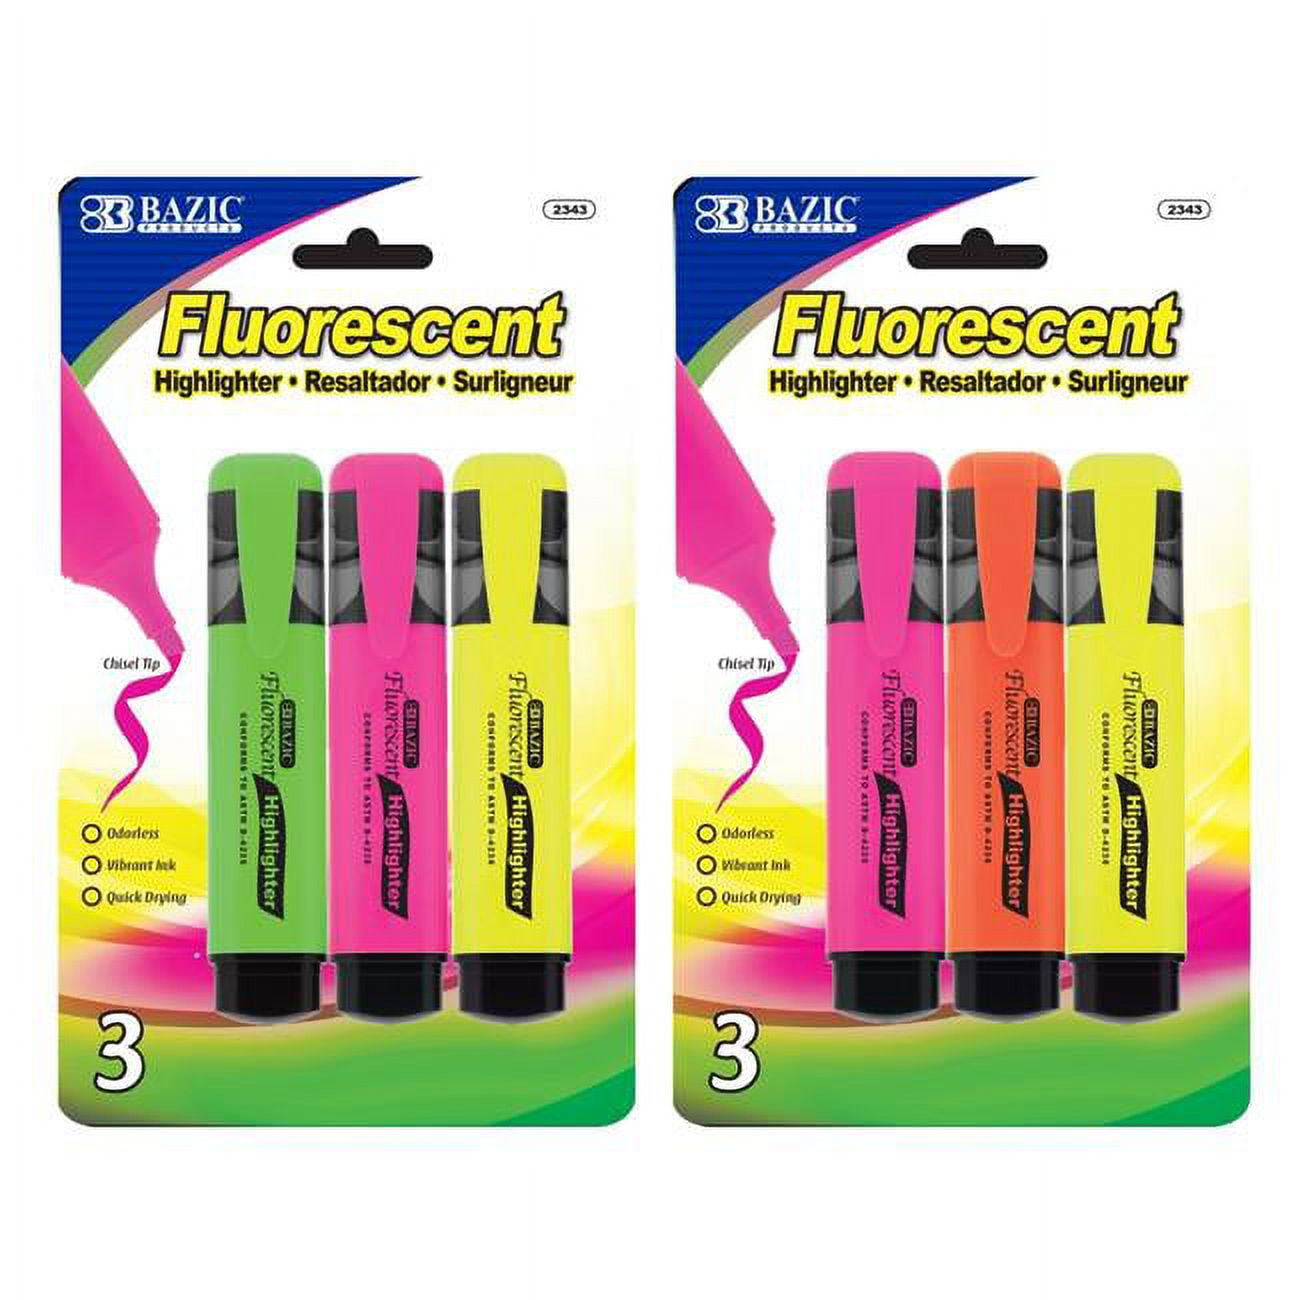 2343 Fluorescent Highlighters With Pocket Clip, Pack Of 3 - Case Of 24